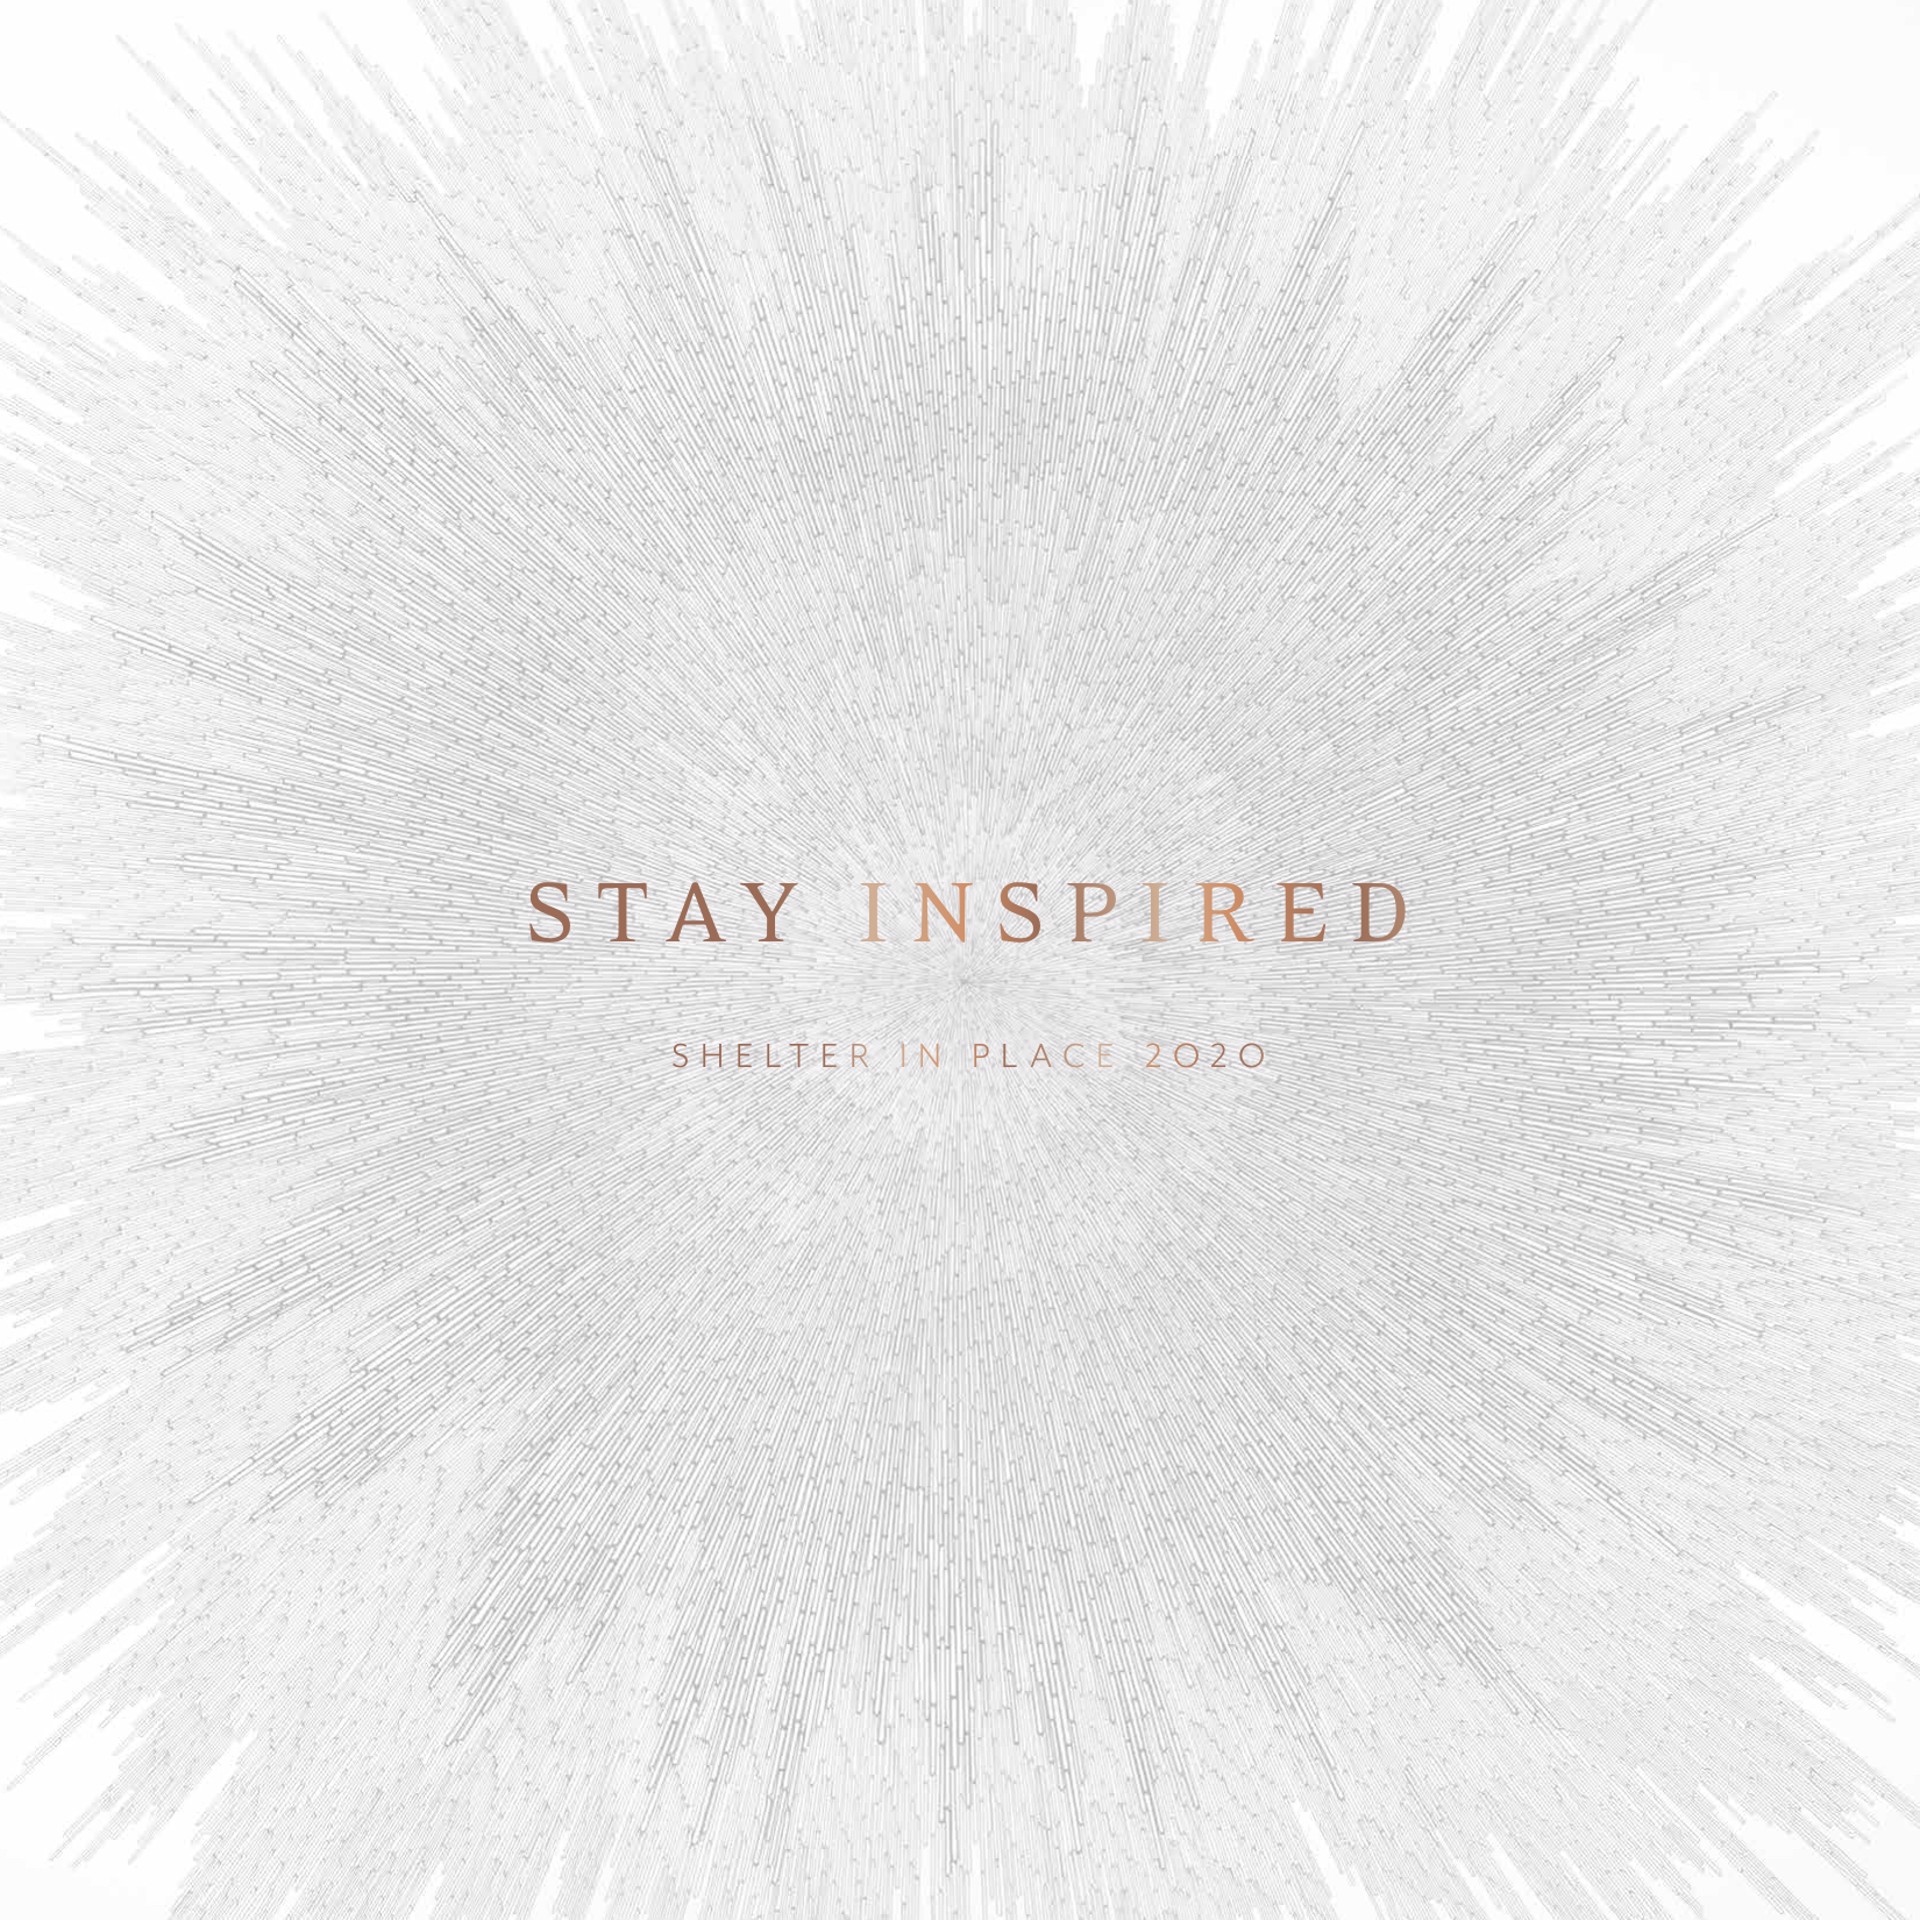 Stay Inspired: Shelter in Place 2020